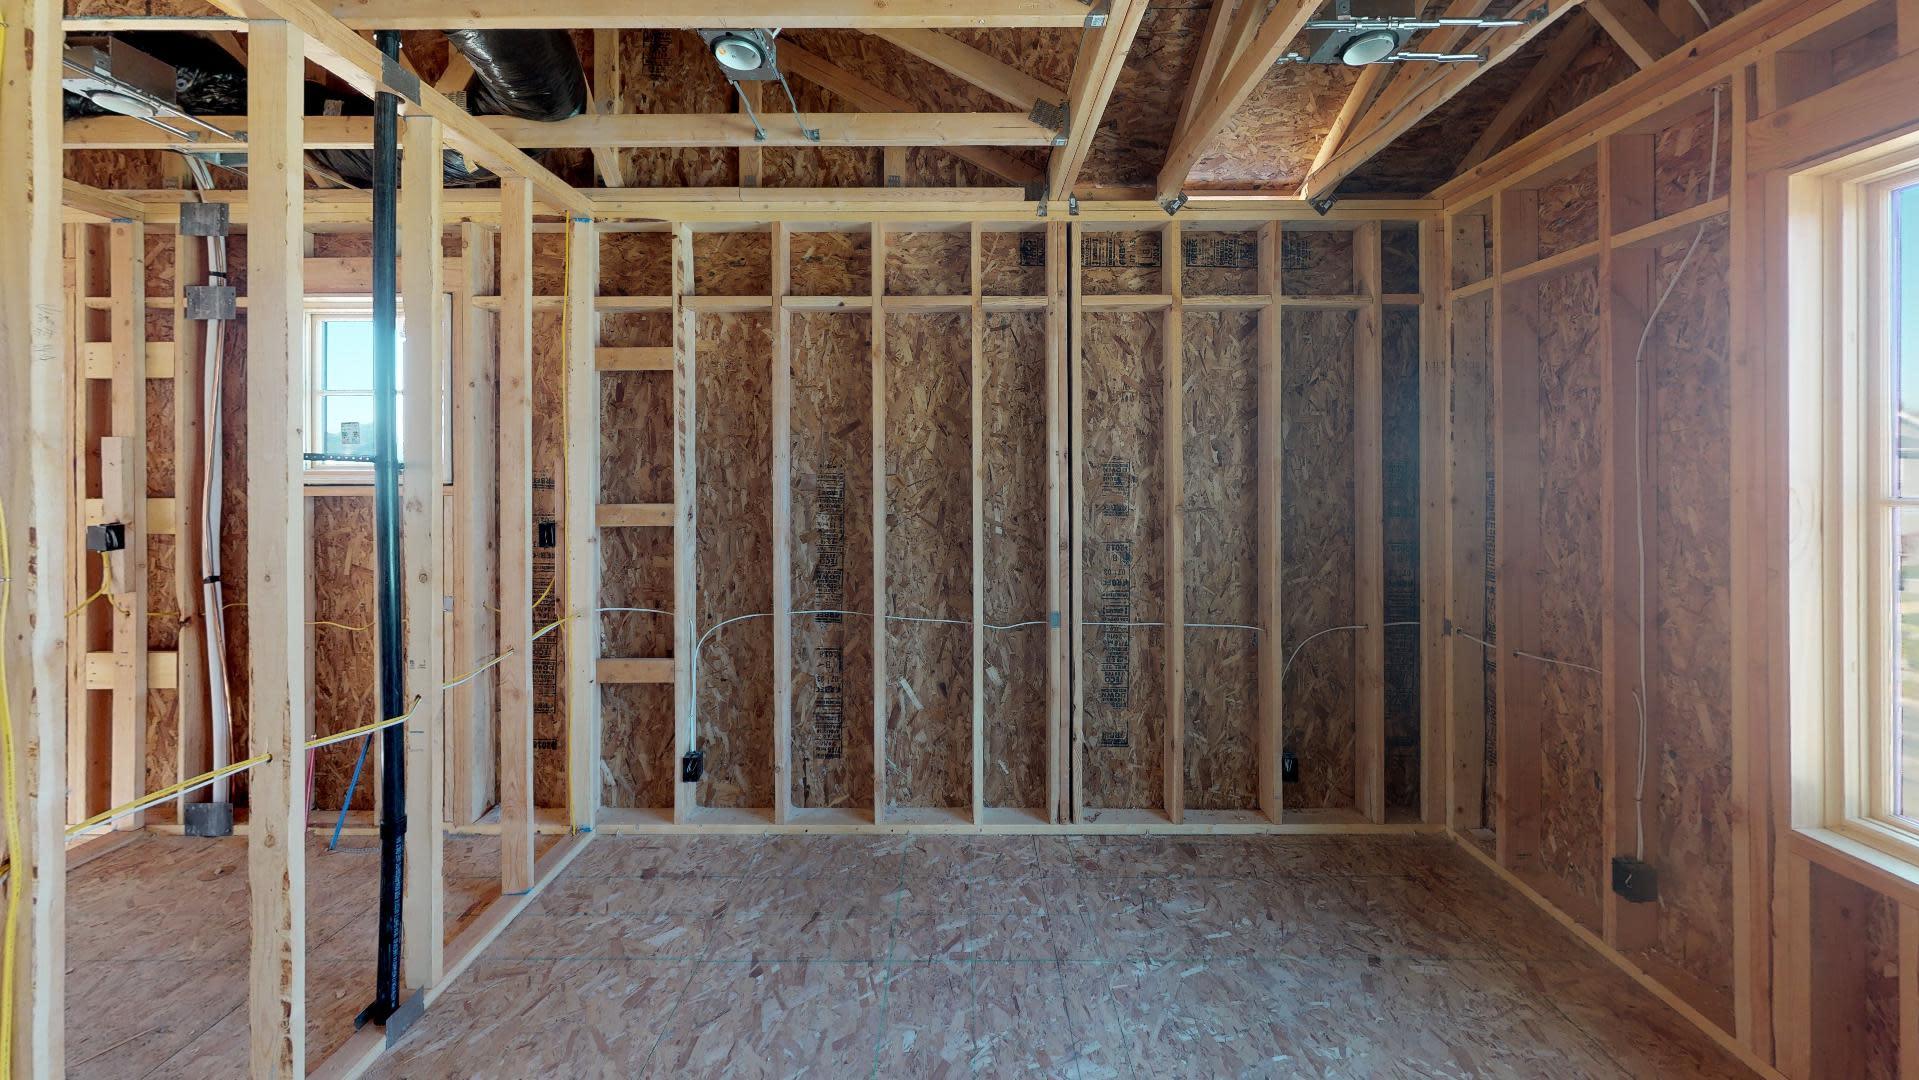 How To Identify A Load-Bearing Wall